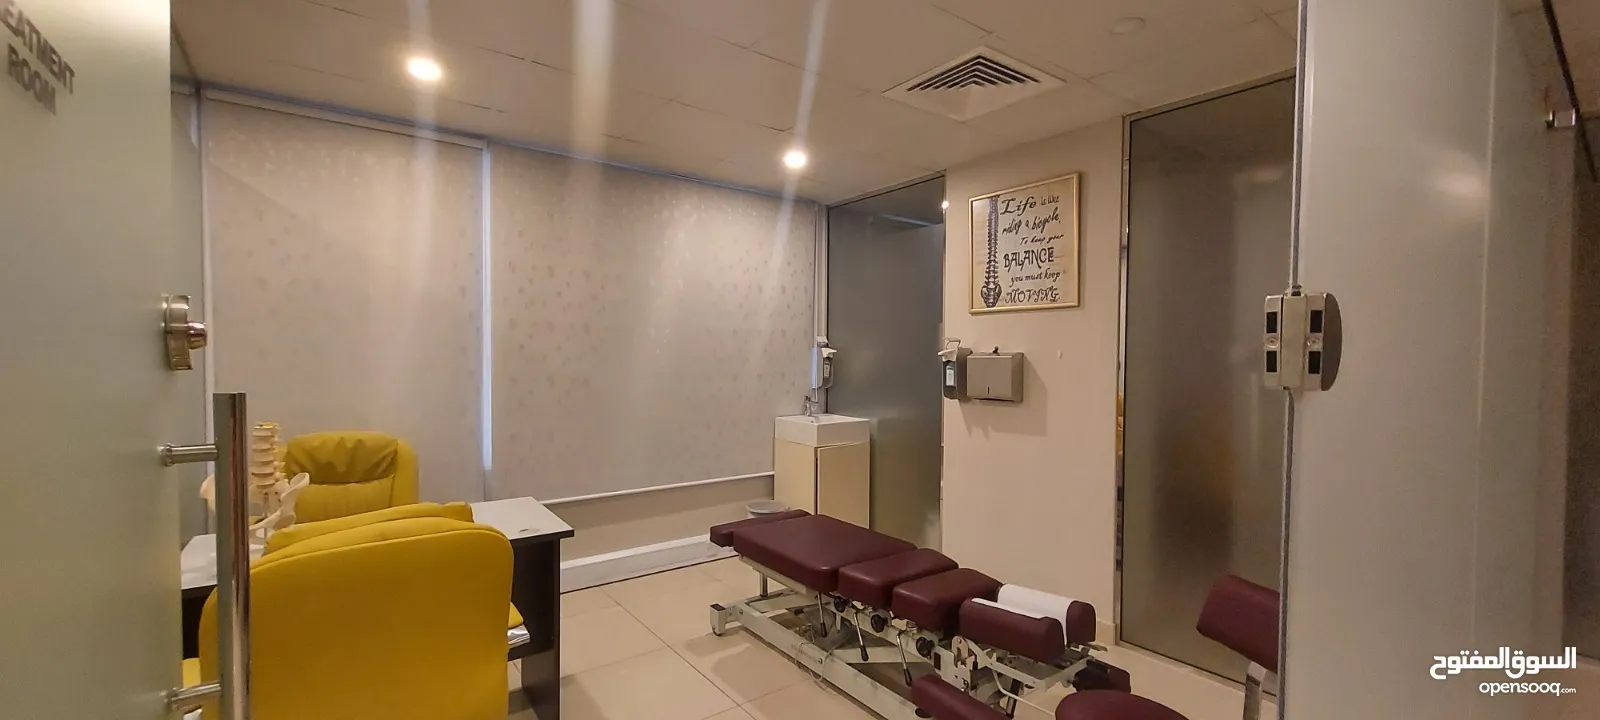 Office Space (Chiropractic) for Rent in Al Khuwair REF:815R